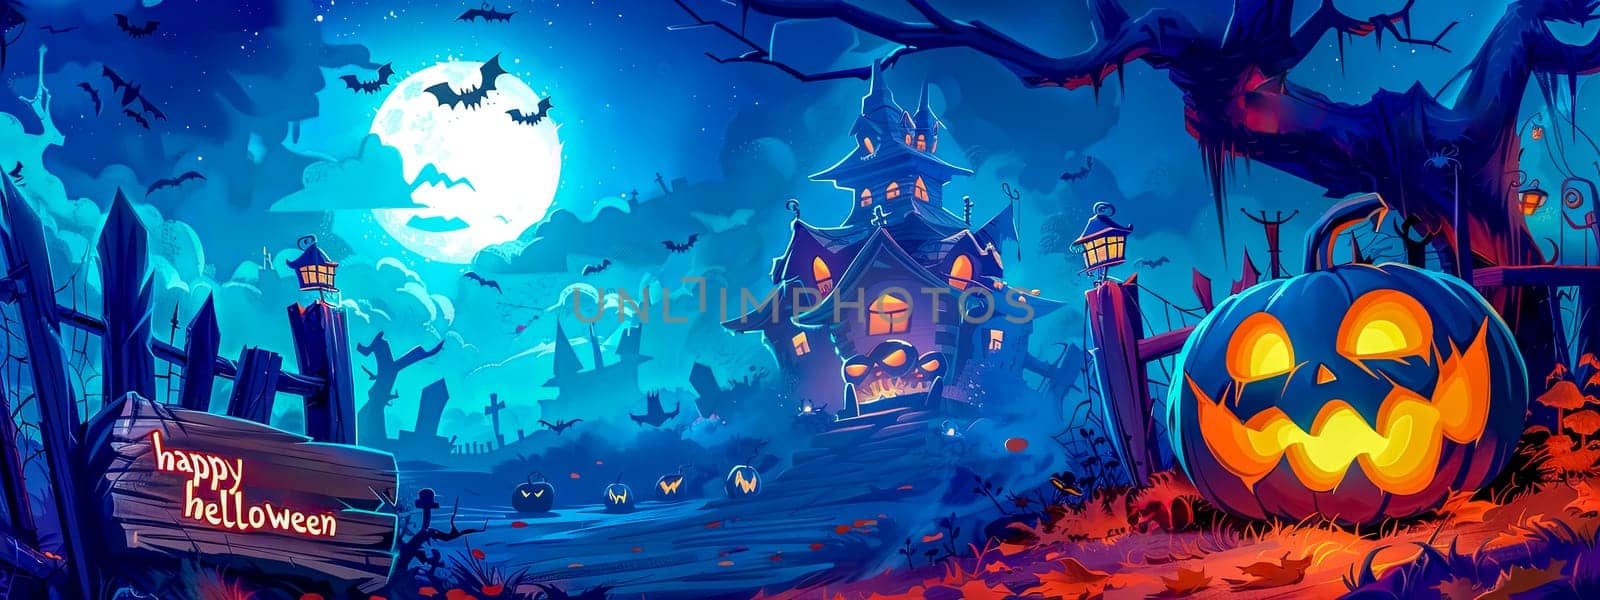 Spooky, vibrant illustration of a halloween scene with a haunted house and jack-o'-lantern under a full moon by Edophoto